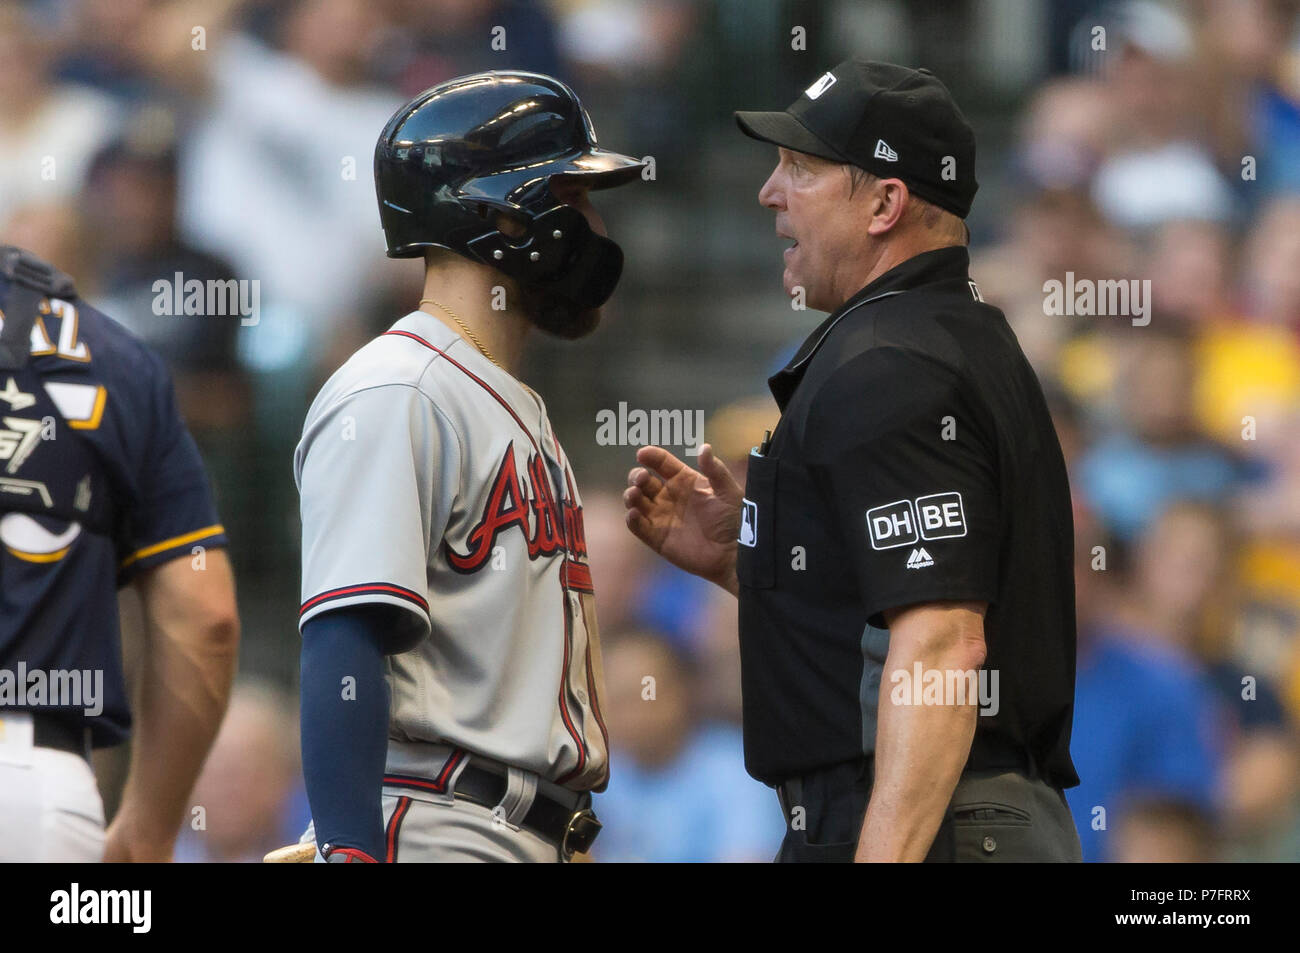 Milwaukee, WI, USA. 5th July, 2018. Atlanta Braves center fielder Ender Inciarte #11 argues a call with home plate umpire Jeff Kellogg during the Major League Baseball game between the Milwaukee Brewers and the Atlanta Braves at Miller Park in Milwaukee, WI. John Fisher/CSM/Alamy Live News Stock Photo